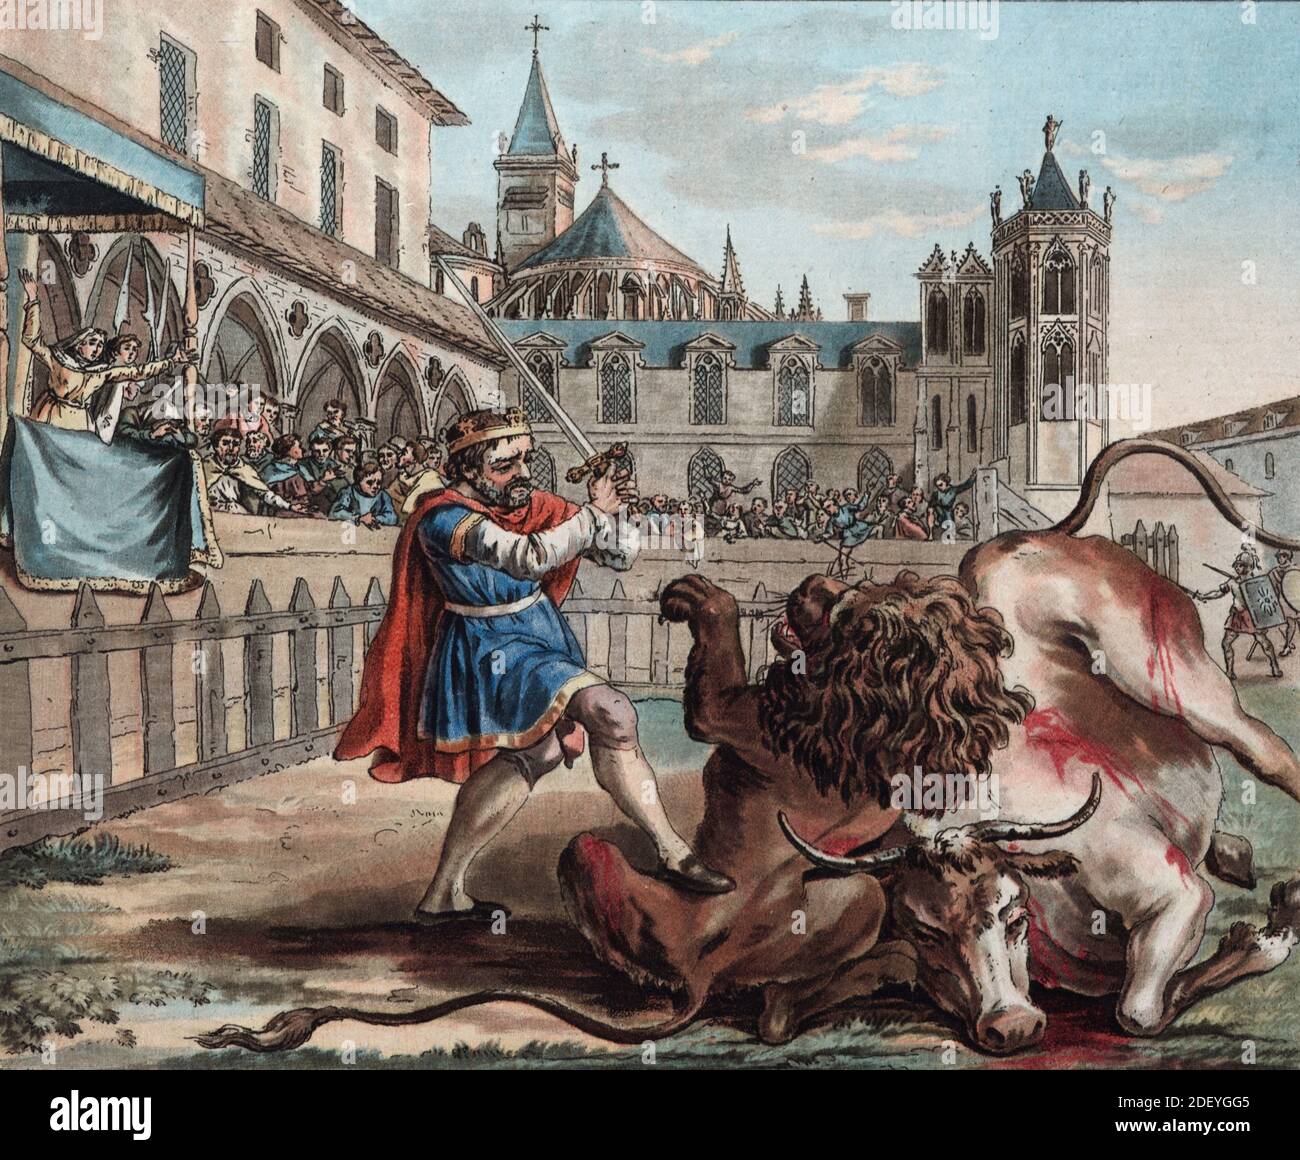 Courage of Pepin the Short (c714-768) King of the Franks (Engr 1789) (Sergent-Moret) Fighting Lions and Bulls in a Medieval Arena. Illustration or Engraving Stock Photo